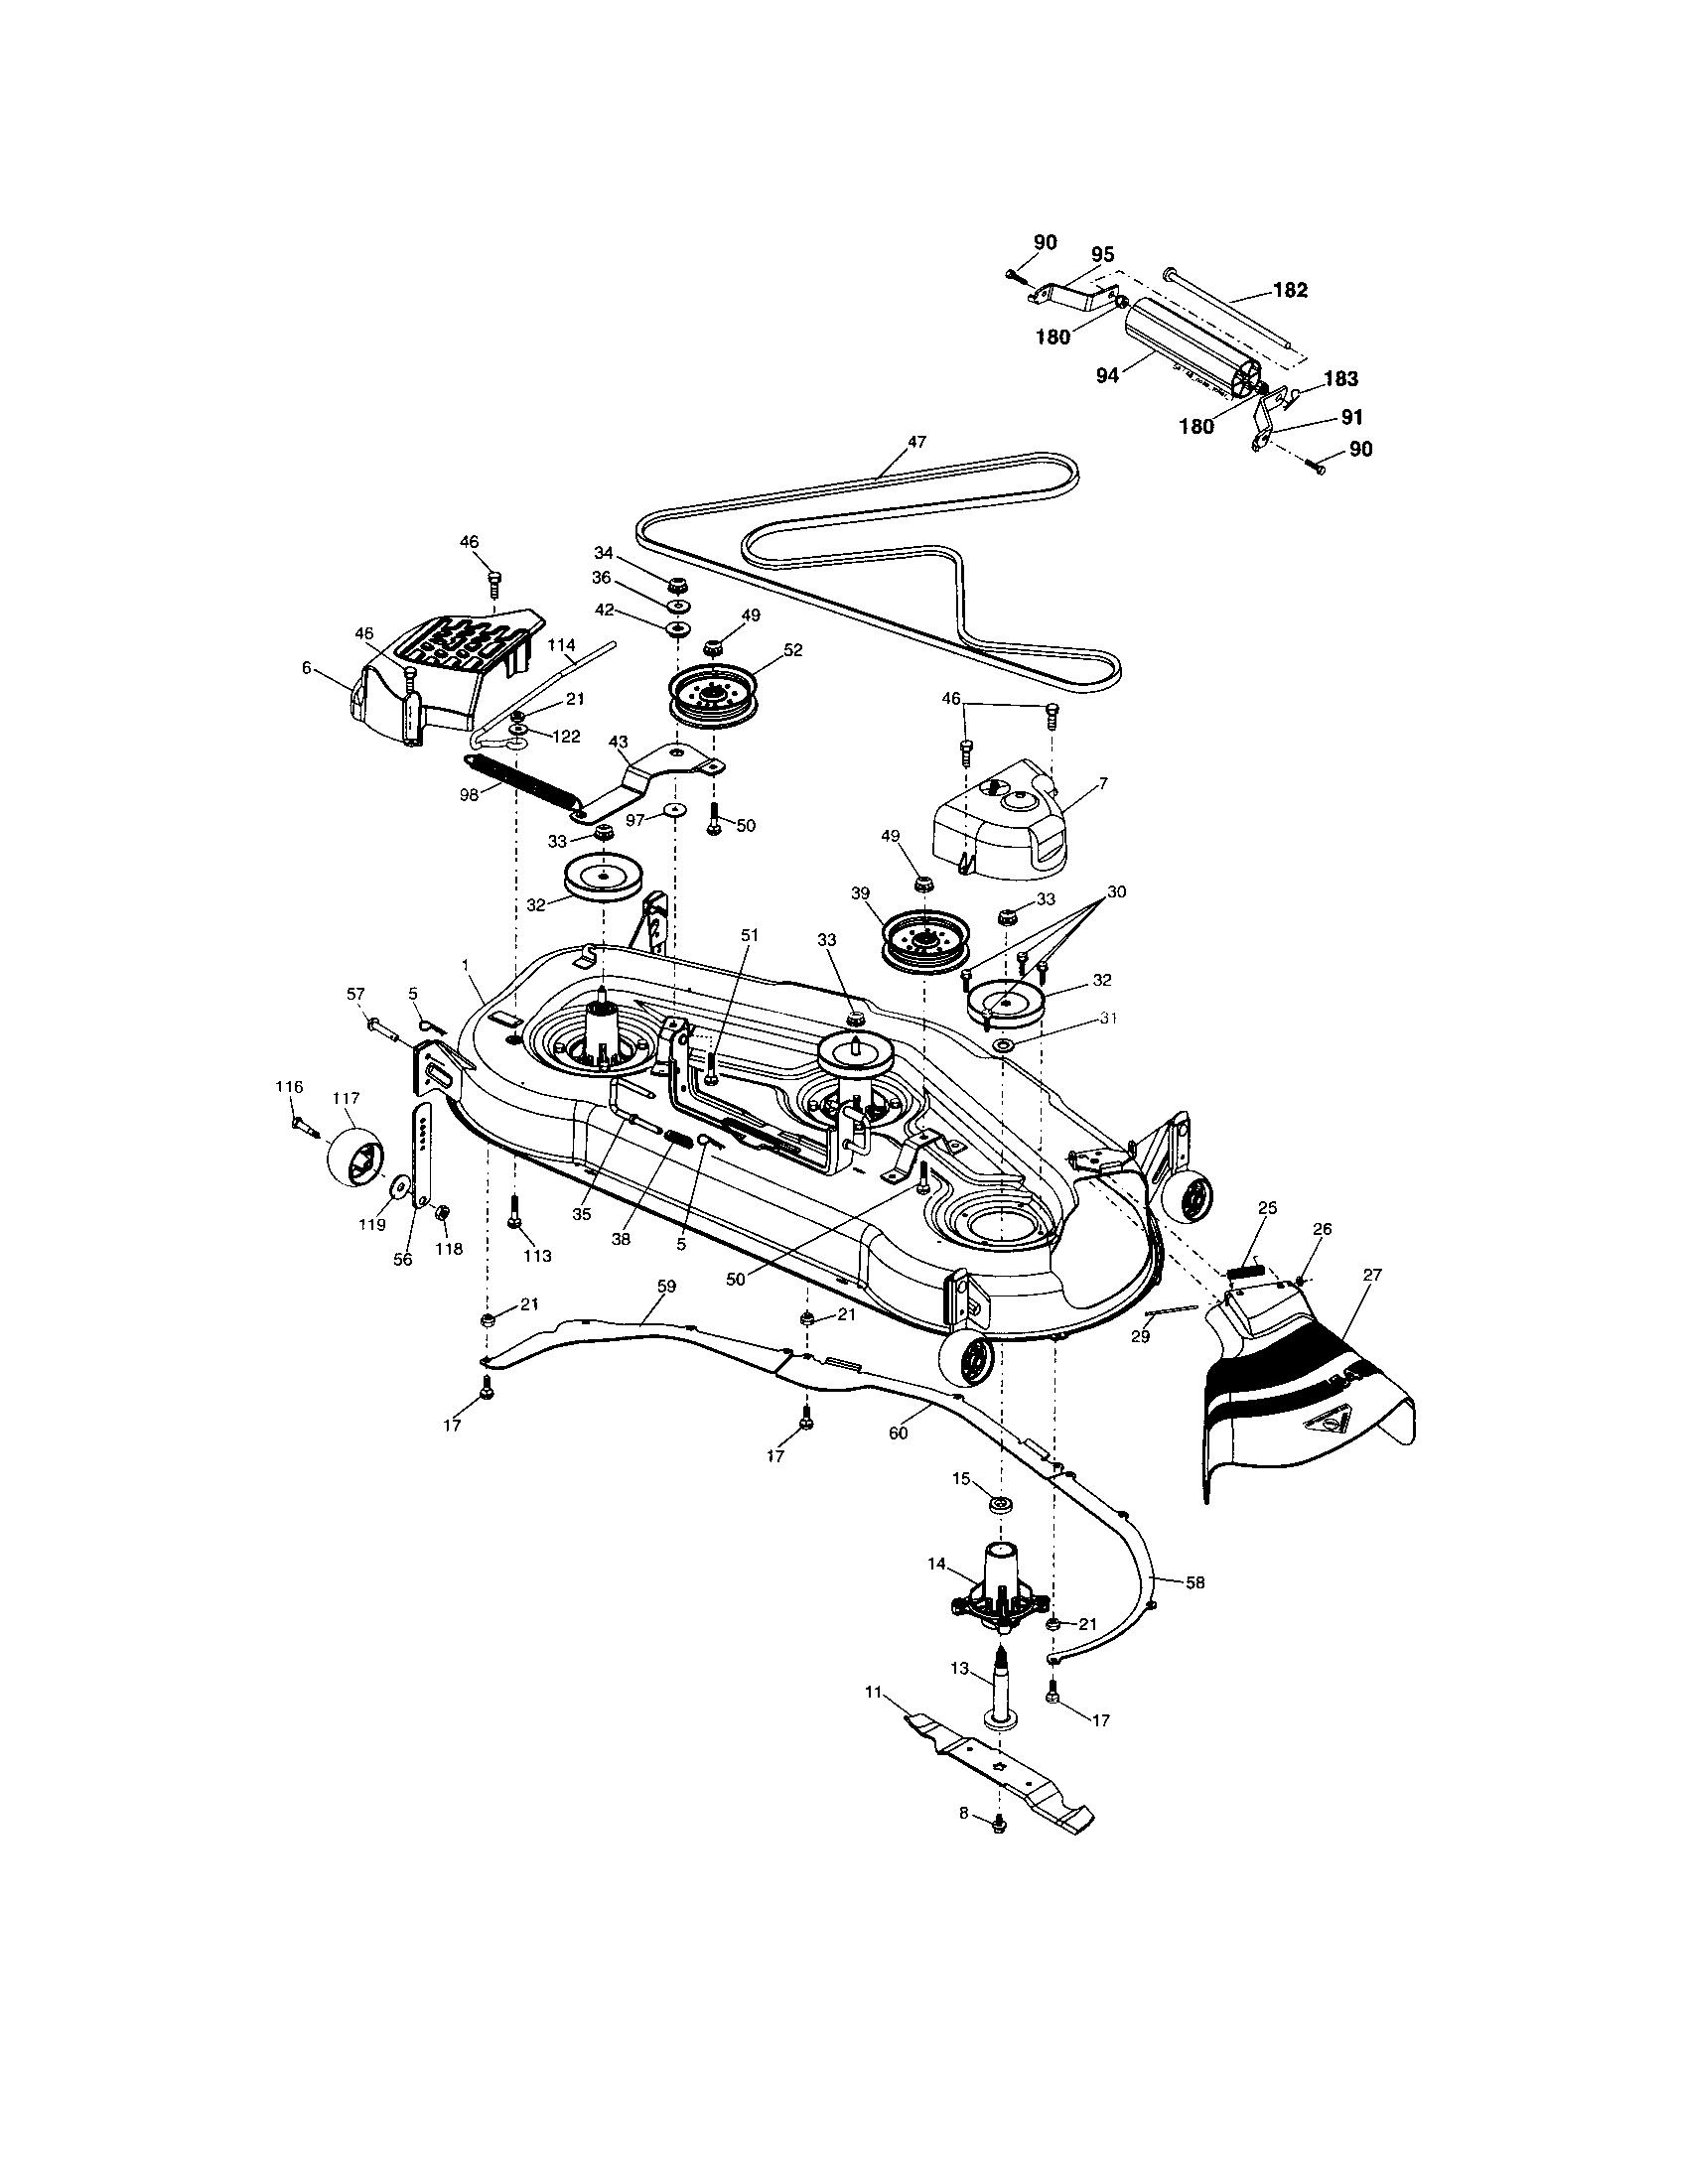 Wiring Diagram For Sears Craftsman Riding Mower from diagramweb.net